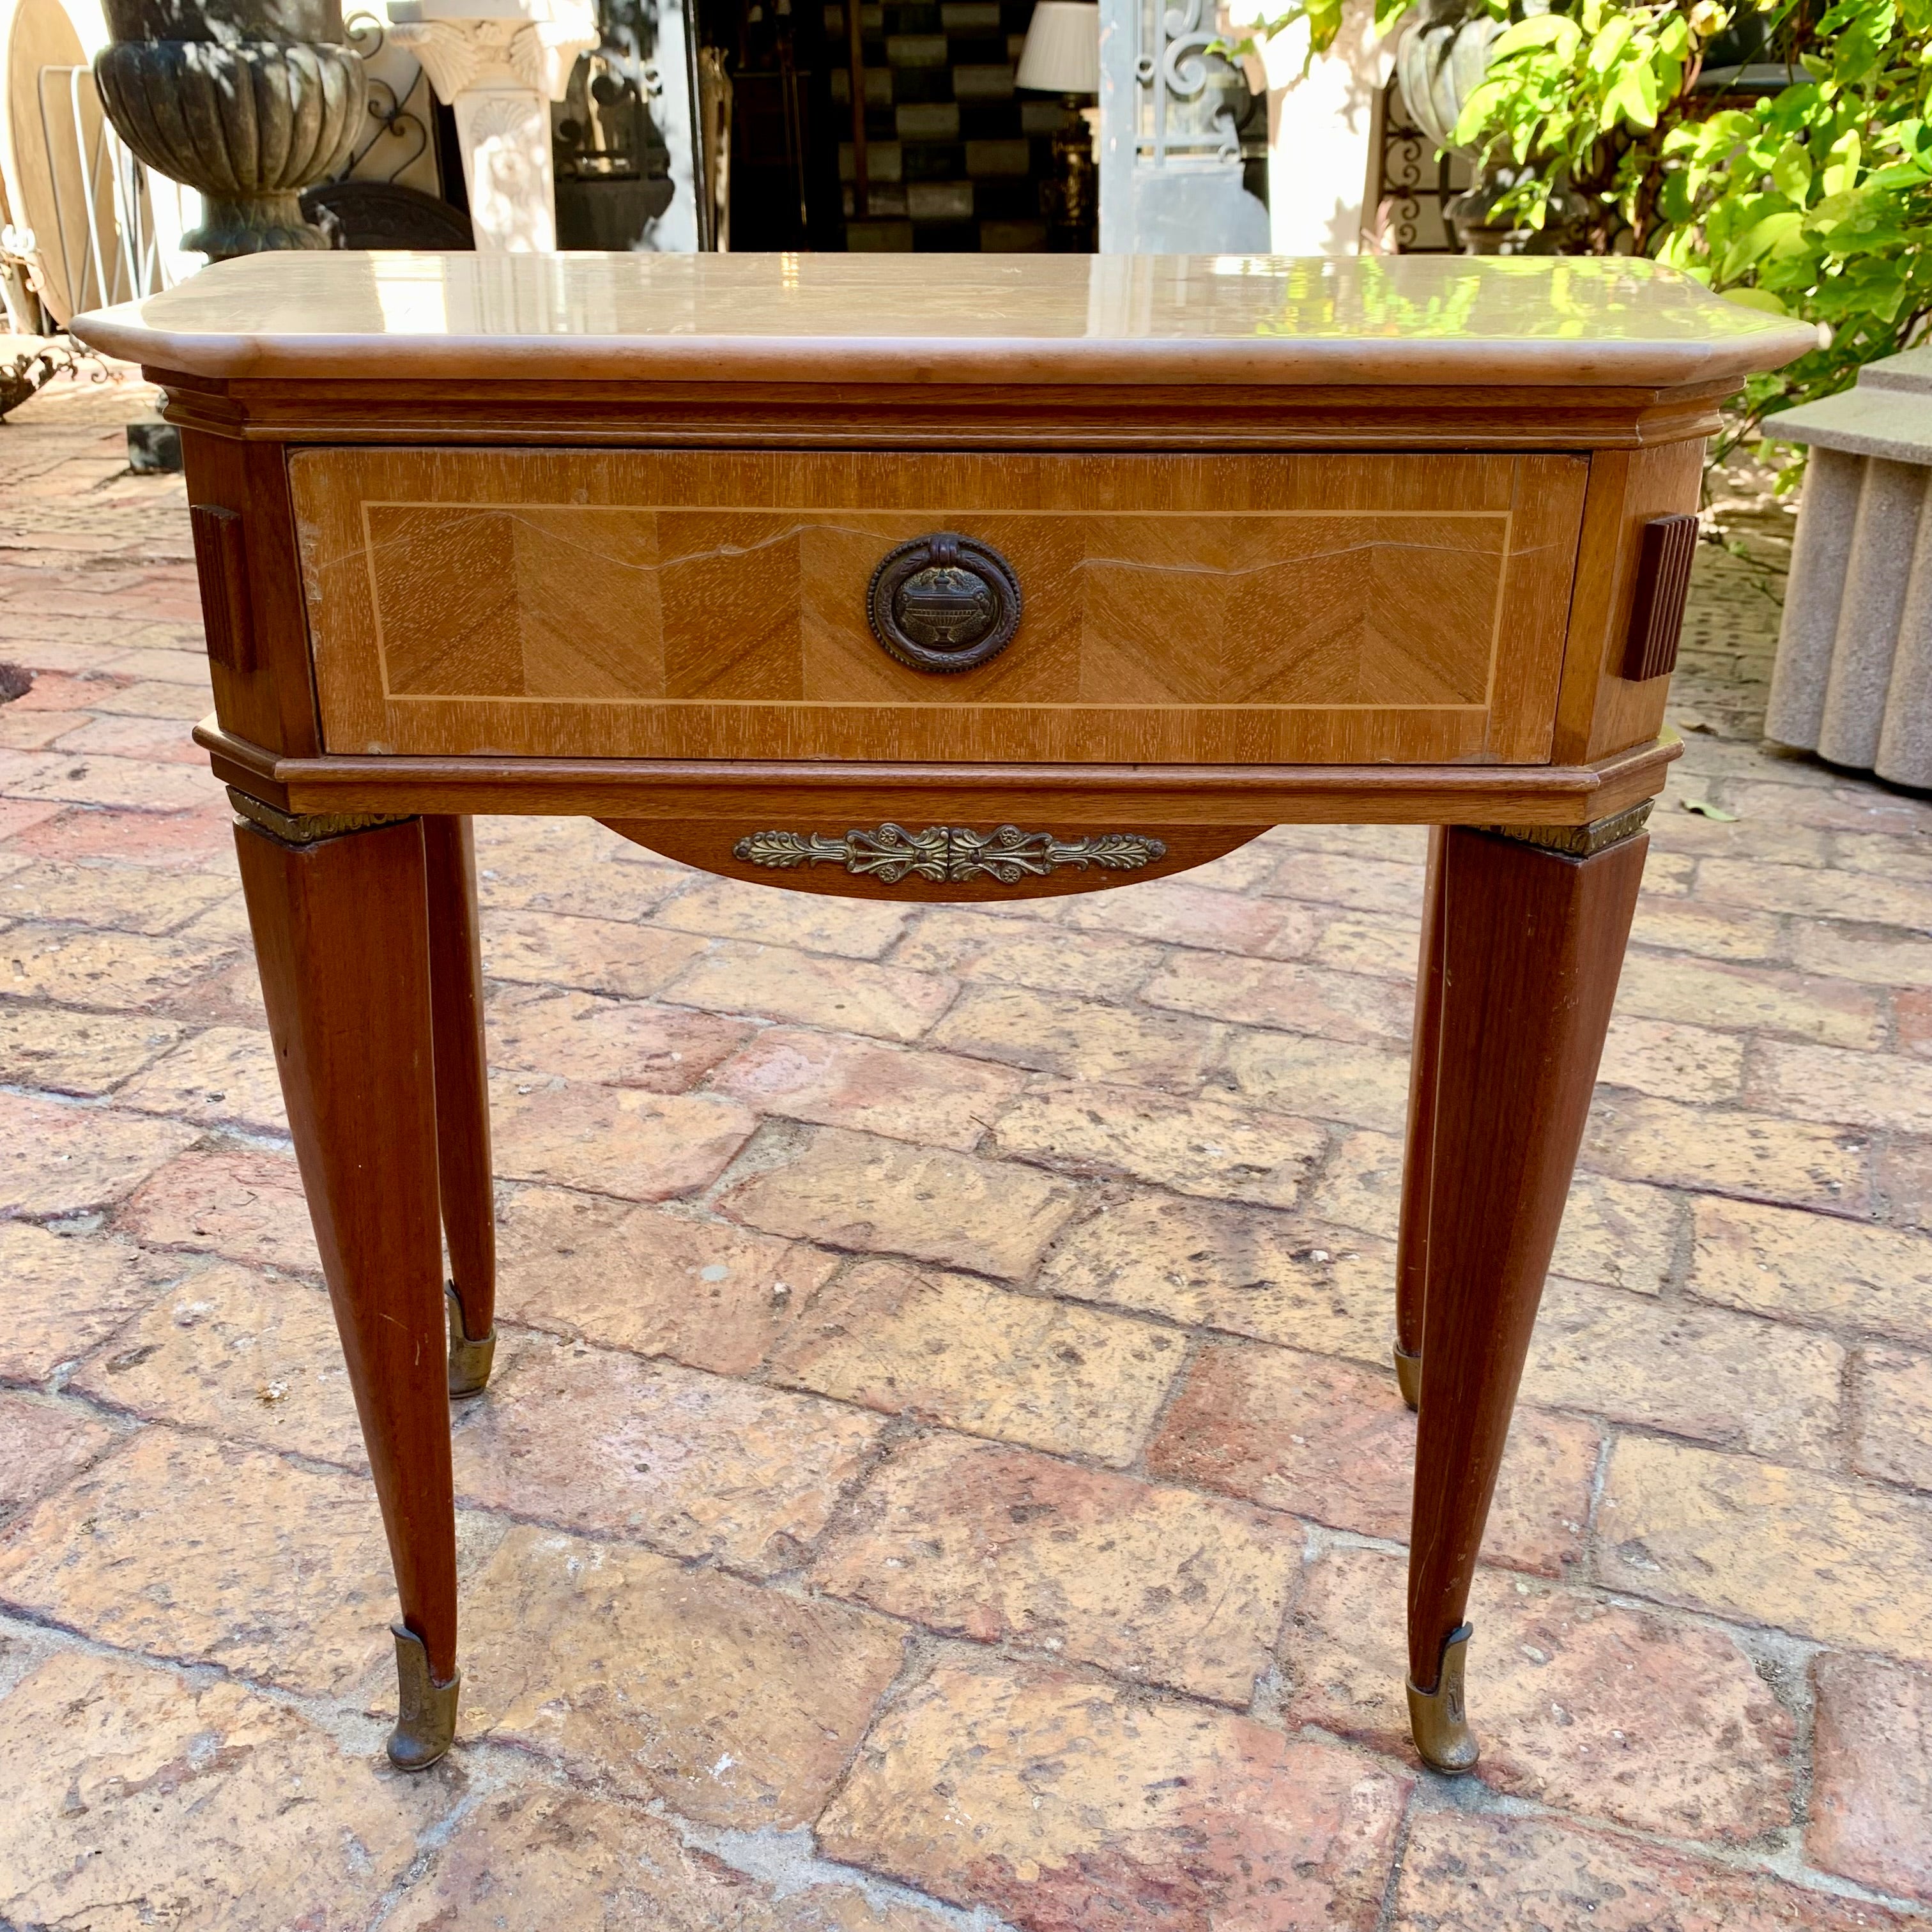 Petite Vintage Table with Marble Top and Brass Detailing